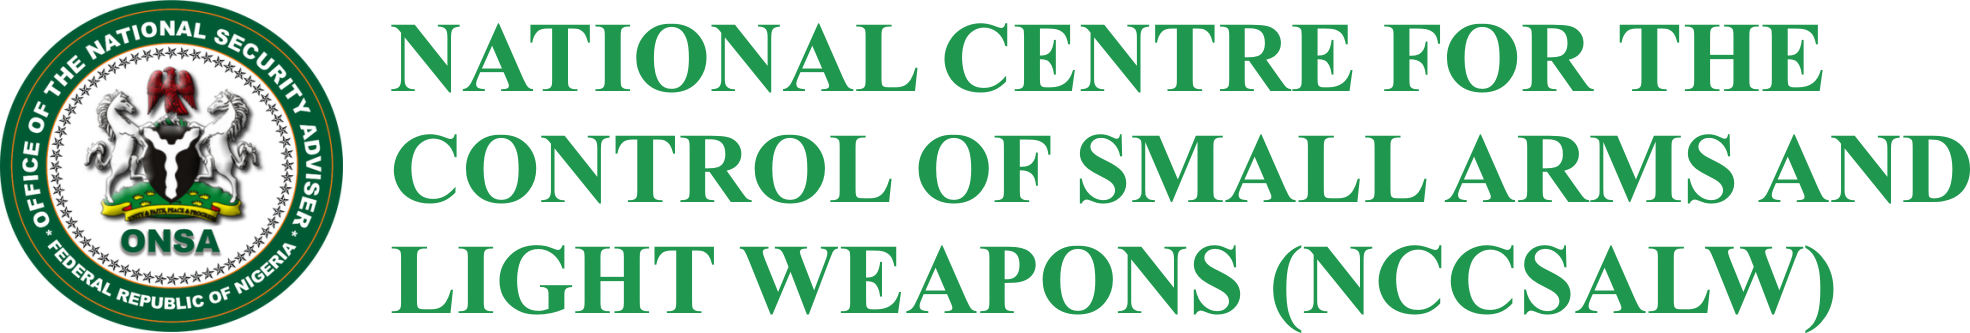 The National Centre for the Control of Small Arms and Light Weapons (NCCSALW)